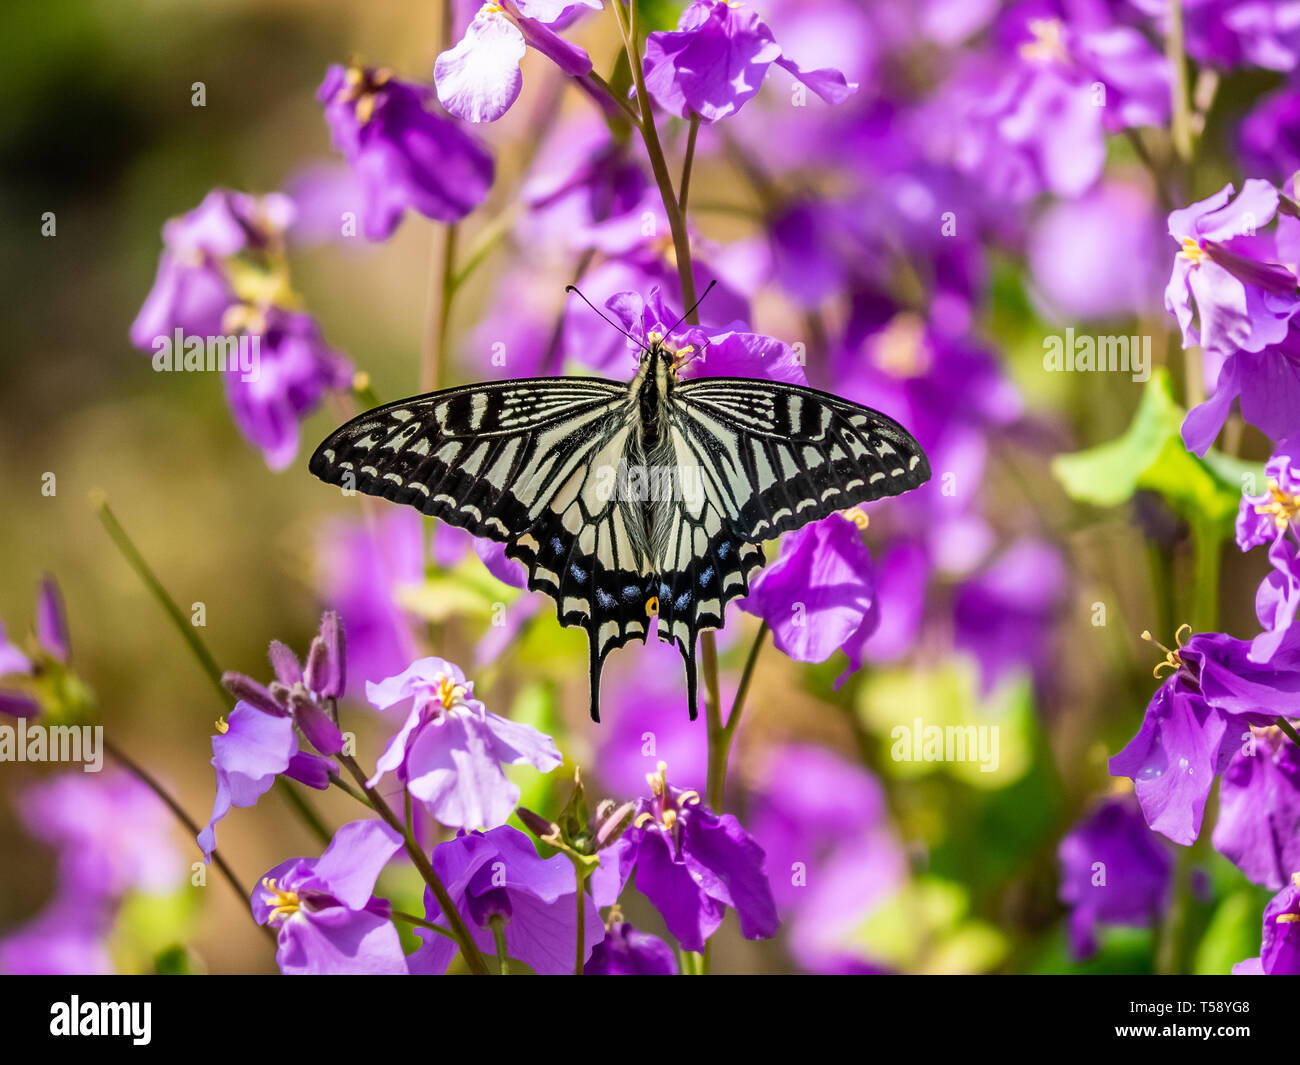 An Asian swallowtail butterfly, Papilio xuthus, feeds from annual honesty flowers along a small wetland in a Japanese forest preserve. Stock Photo